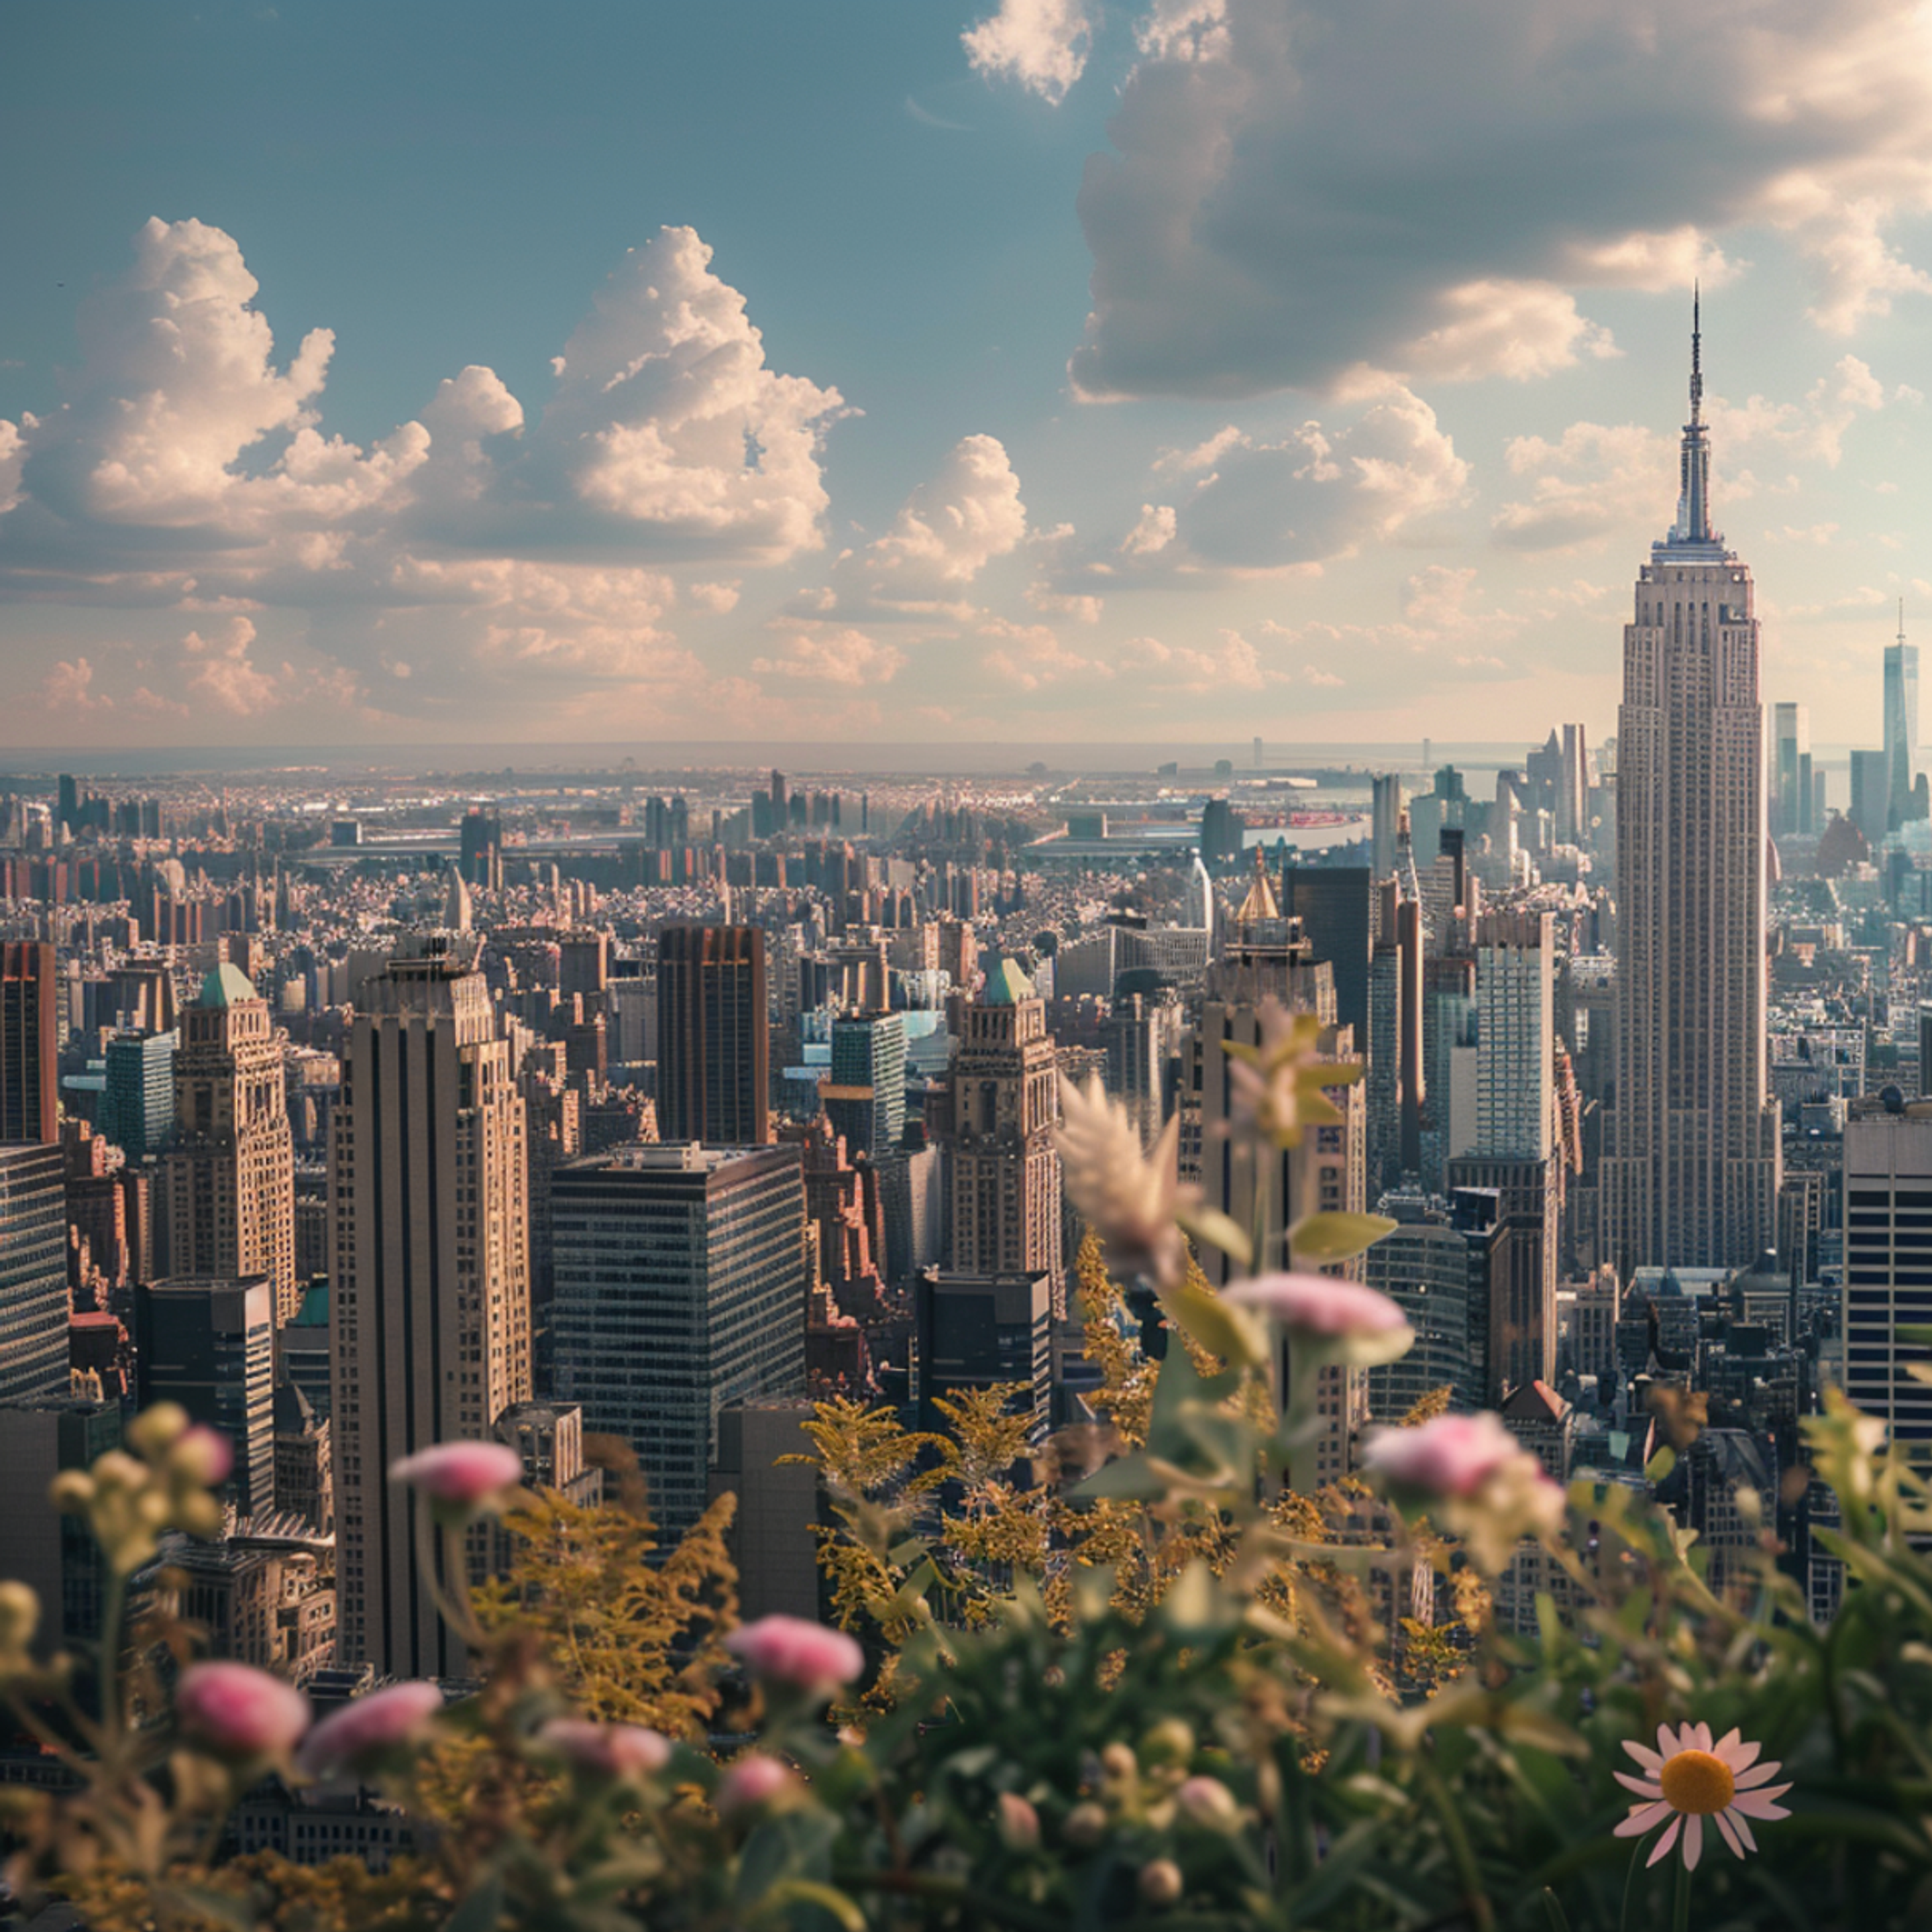 A serene view of New York City's iconic skyline with the Empire State Building standing tall, seen through a foreground of delicate wildflowers, symbolizing thoughtful same-day flower delivery integrated into the city's bustling life.